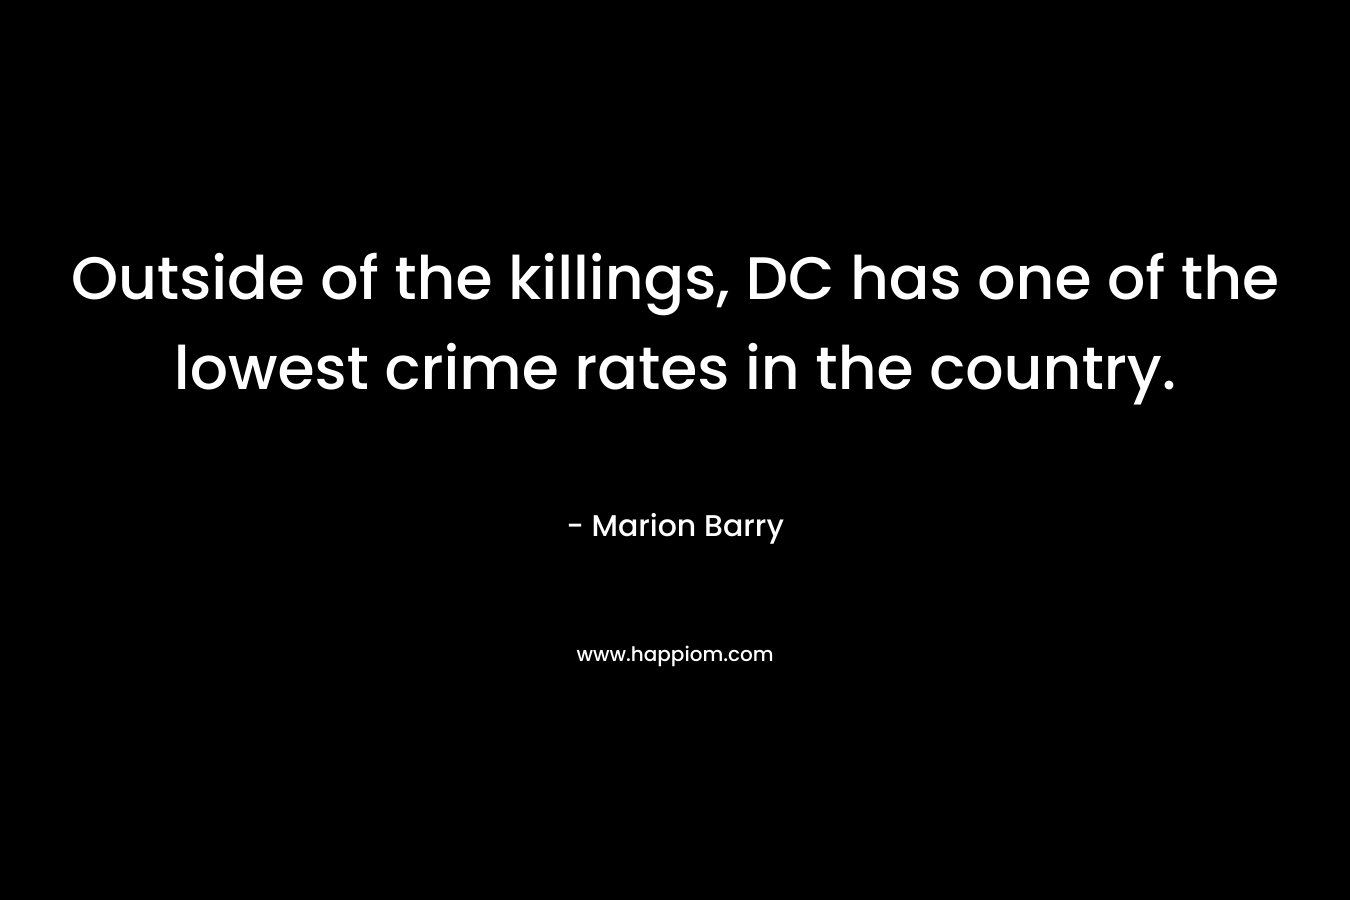 Outside of the killings, DC has one of the lowest crime rates in the country. – Marion Barry